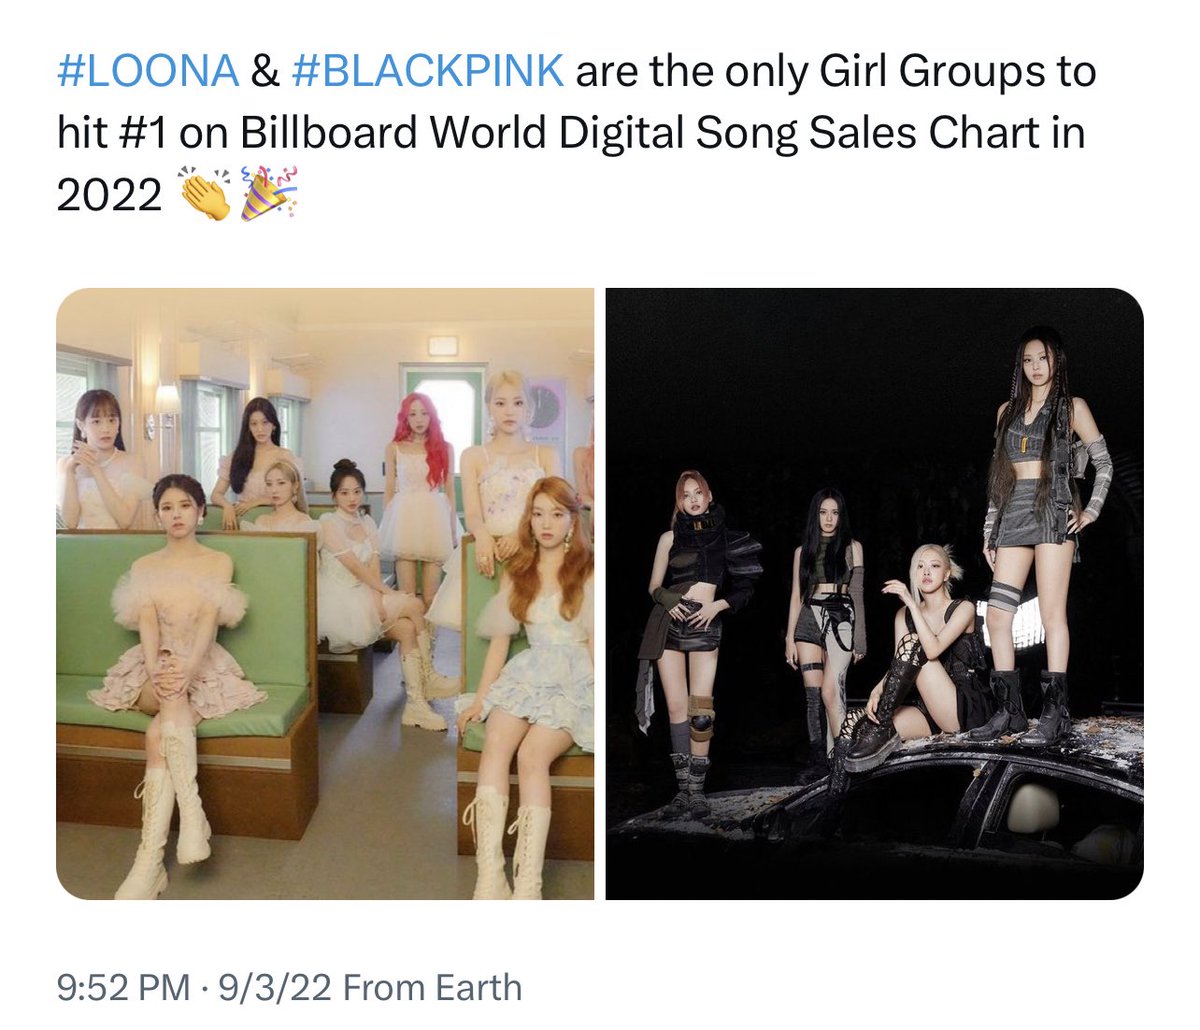 i mean, idk about you guys but i for one live in the universe where loona have repeatedly reached the same records as blackpink 😁